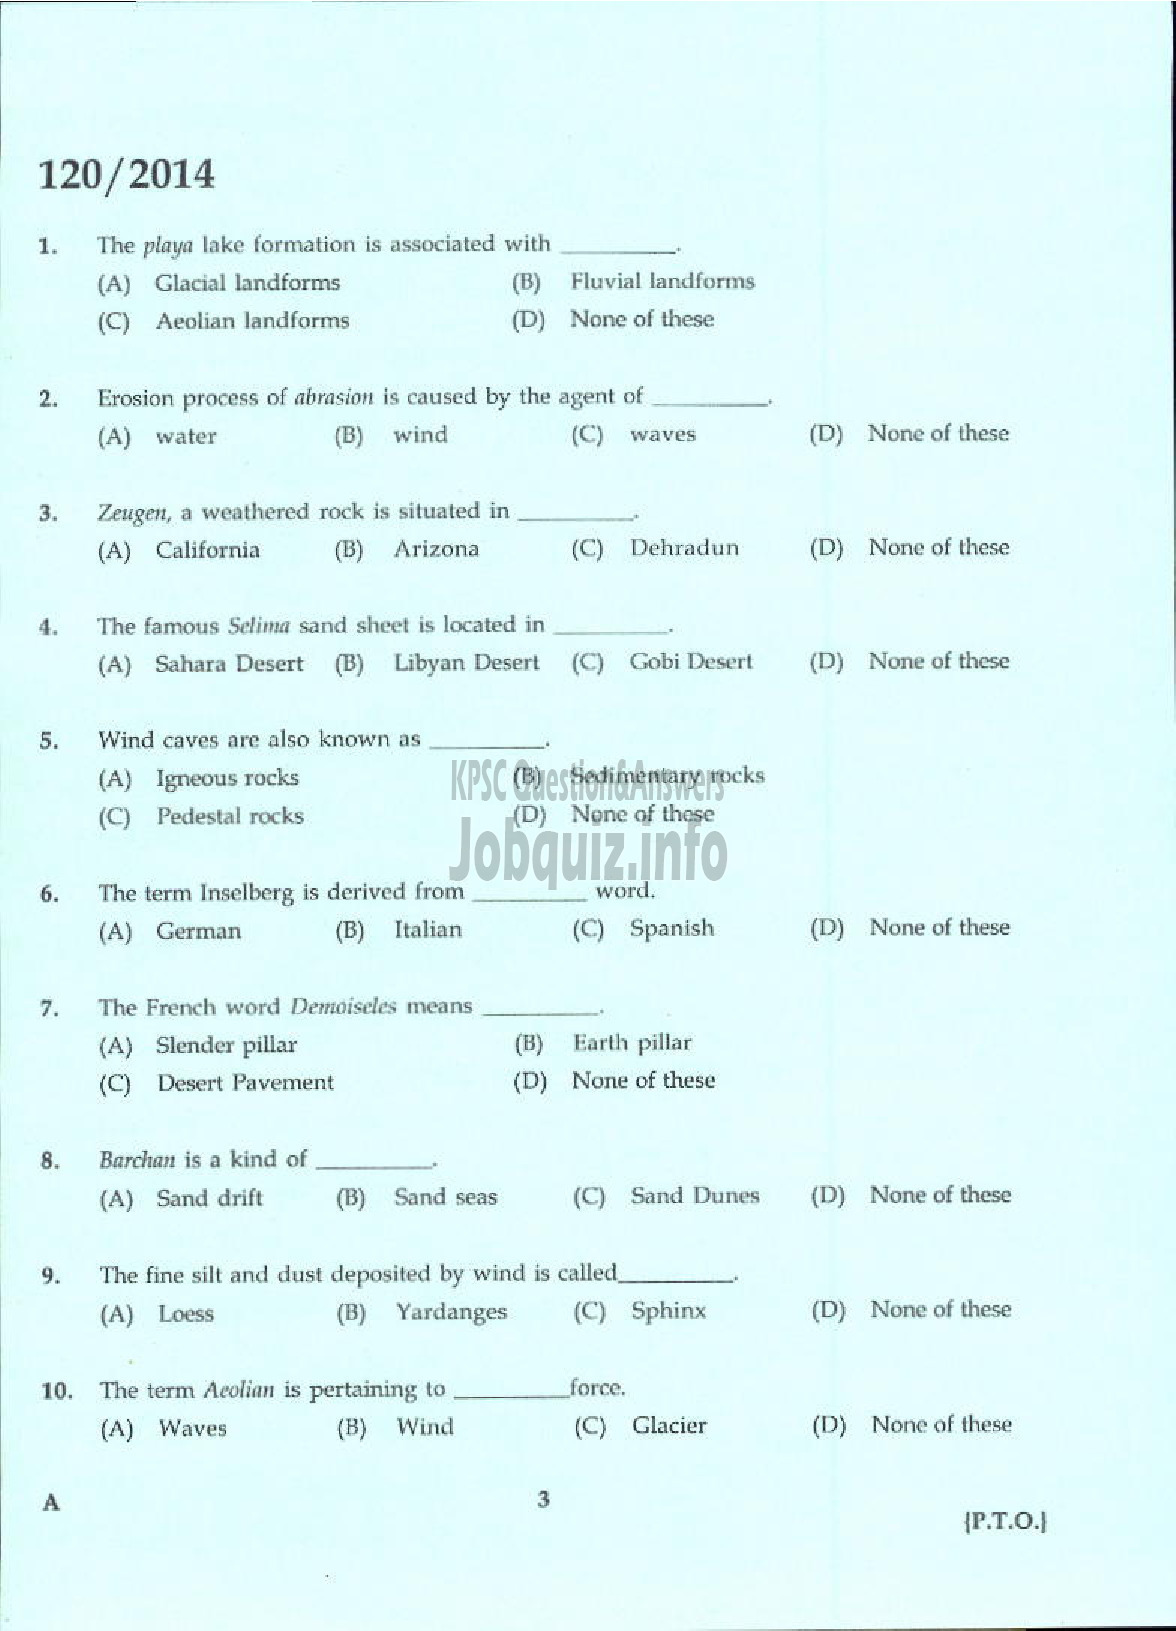 Kerala PSC Question Paper - LECTURER IN GEOGRAPHY KERALA COLLEGIATE EDUCATION-1